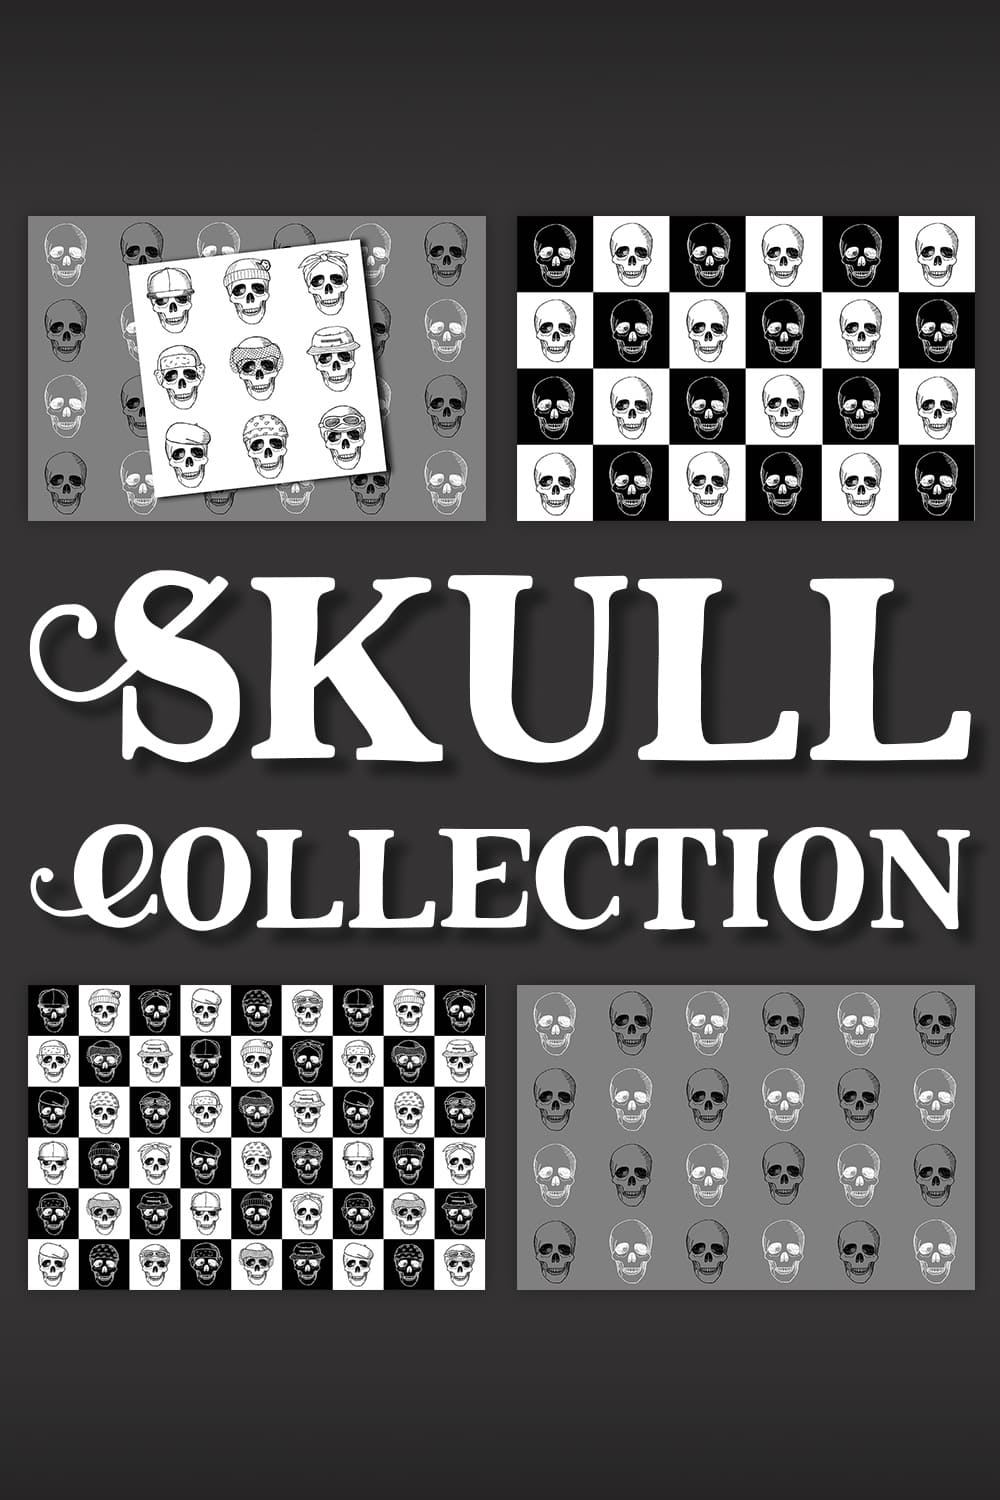 Skull Collection pinterest image.